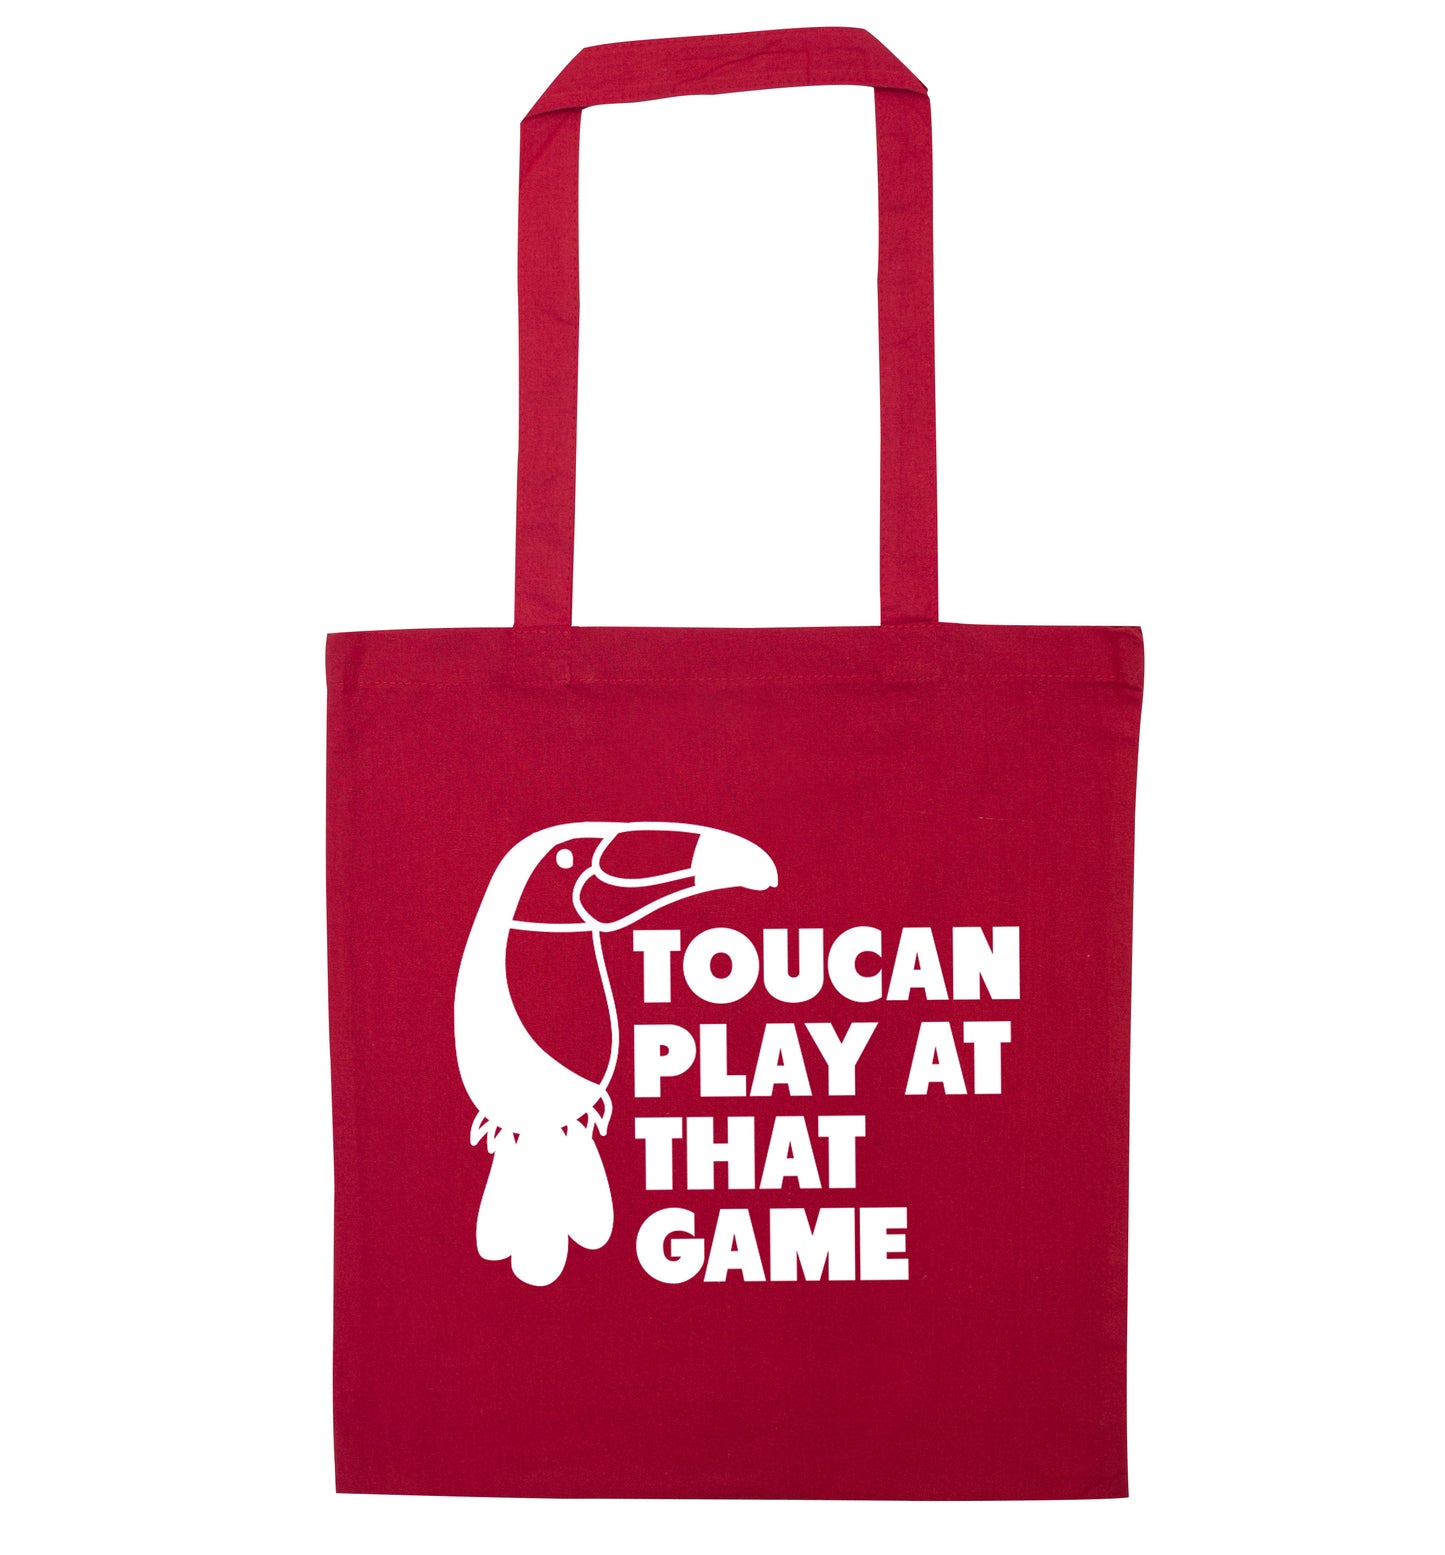 Toucan play at that game red tote bag